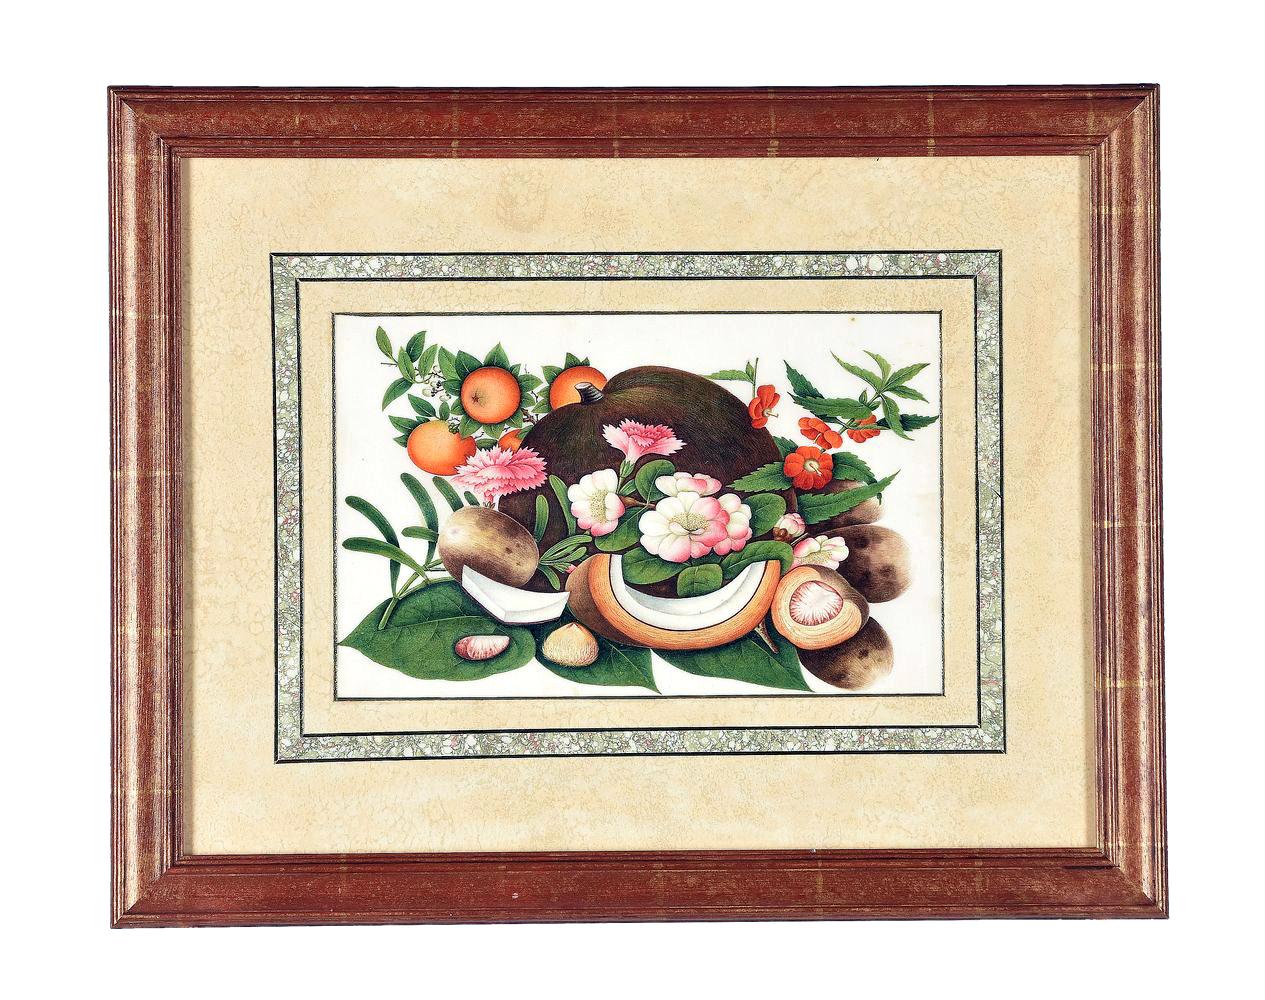 Superb quality painting!

China Trade Watercolor & Gouache on pith paper,
 Set of twelve paintings of fruit and flowers,
Circa 1850-1860

The set of twelve China trade watercolor still life paintings, each different and of the finest quality,